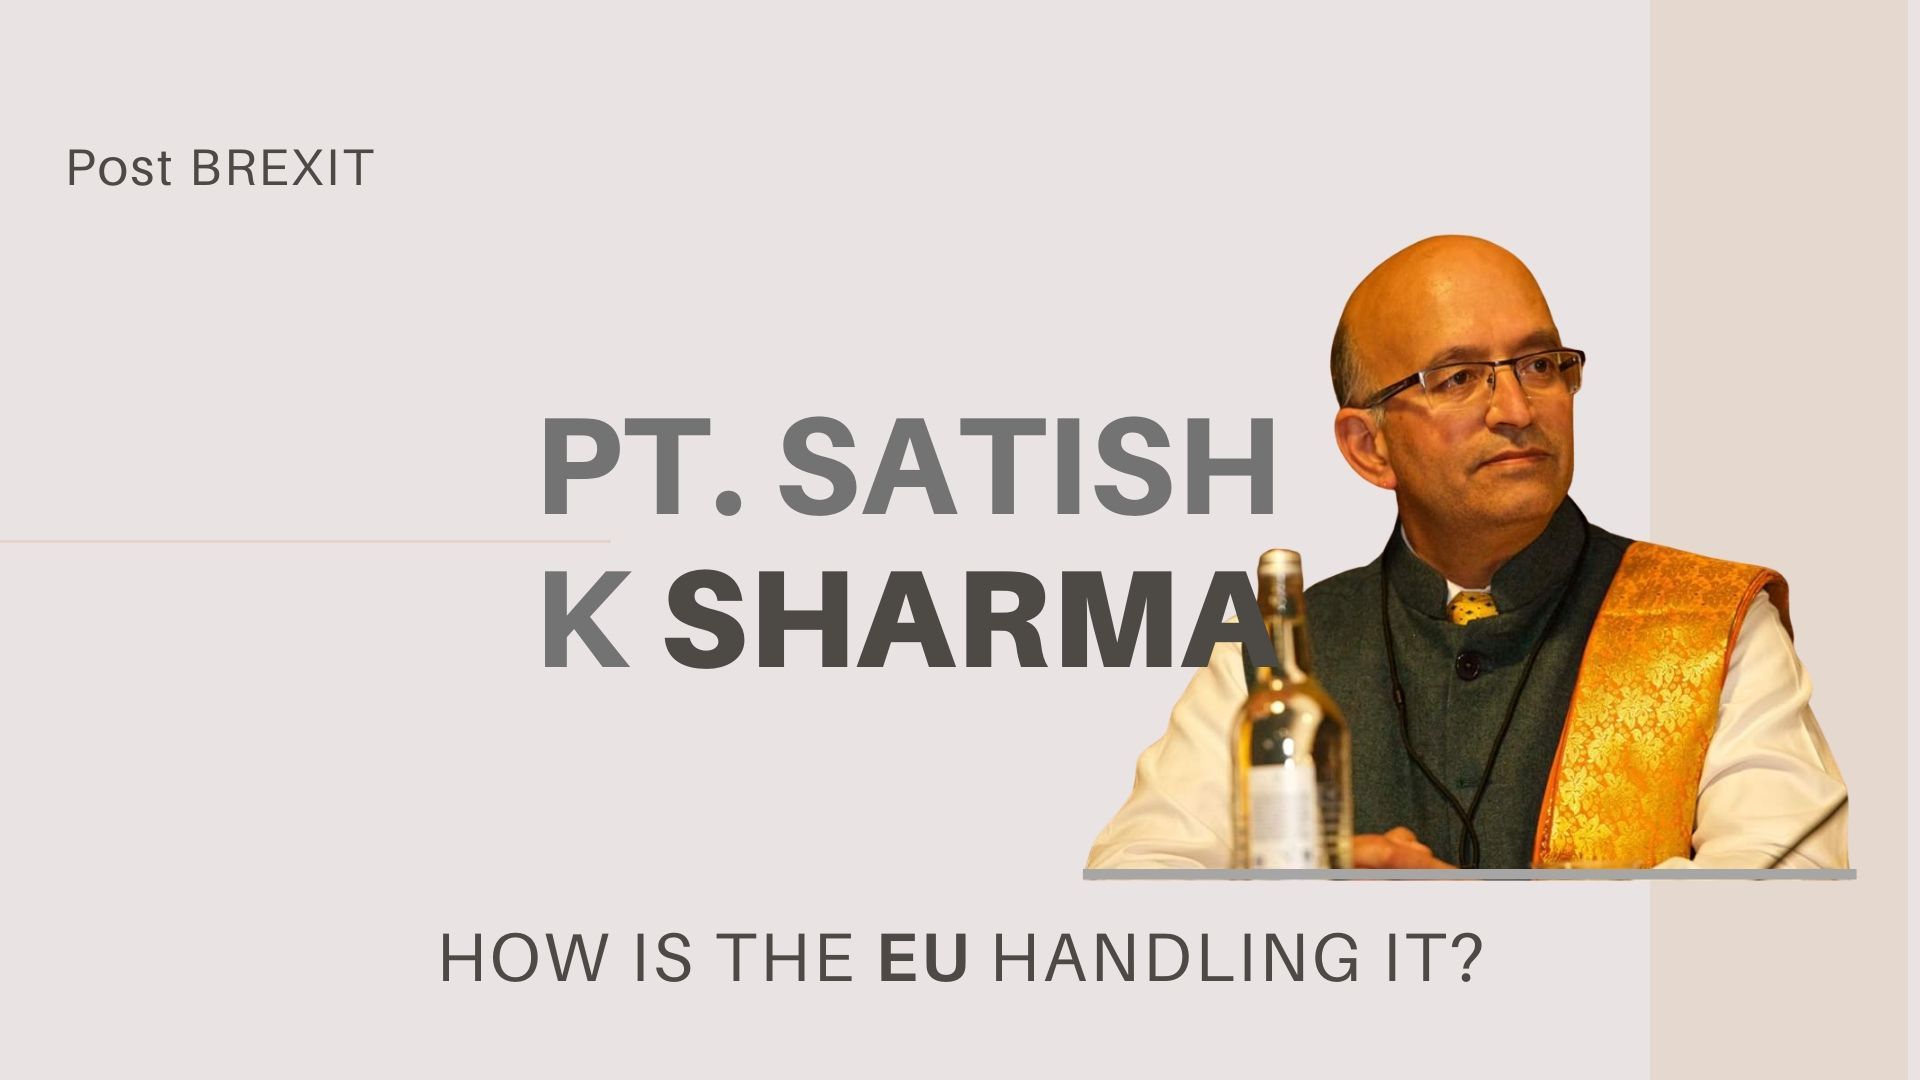 In this engrossing episode, Pt. Satish Kumar Sharma looks at what Brexit means to the European Union and why no one asked the EU what happens if UK leaves. How Sanatana Dharma can show the way for the world is also discussed.